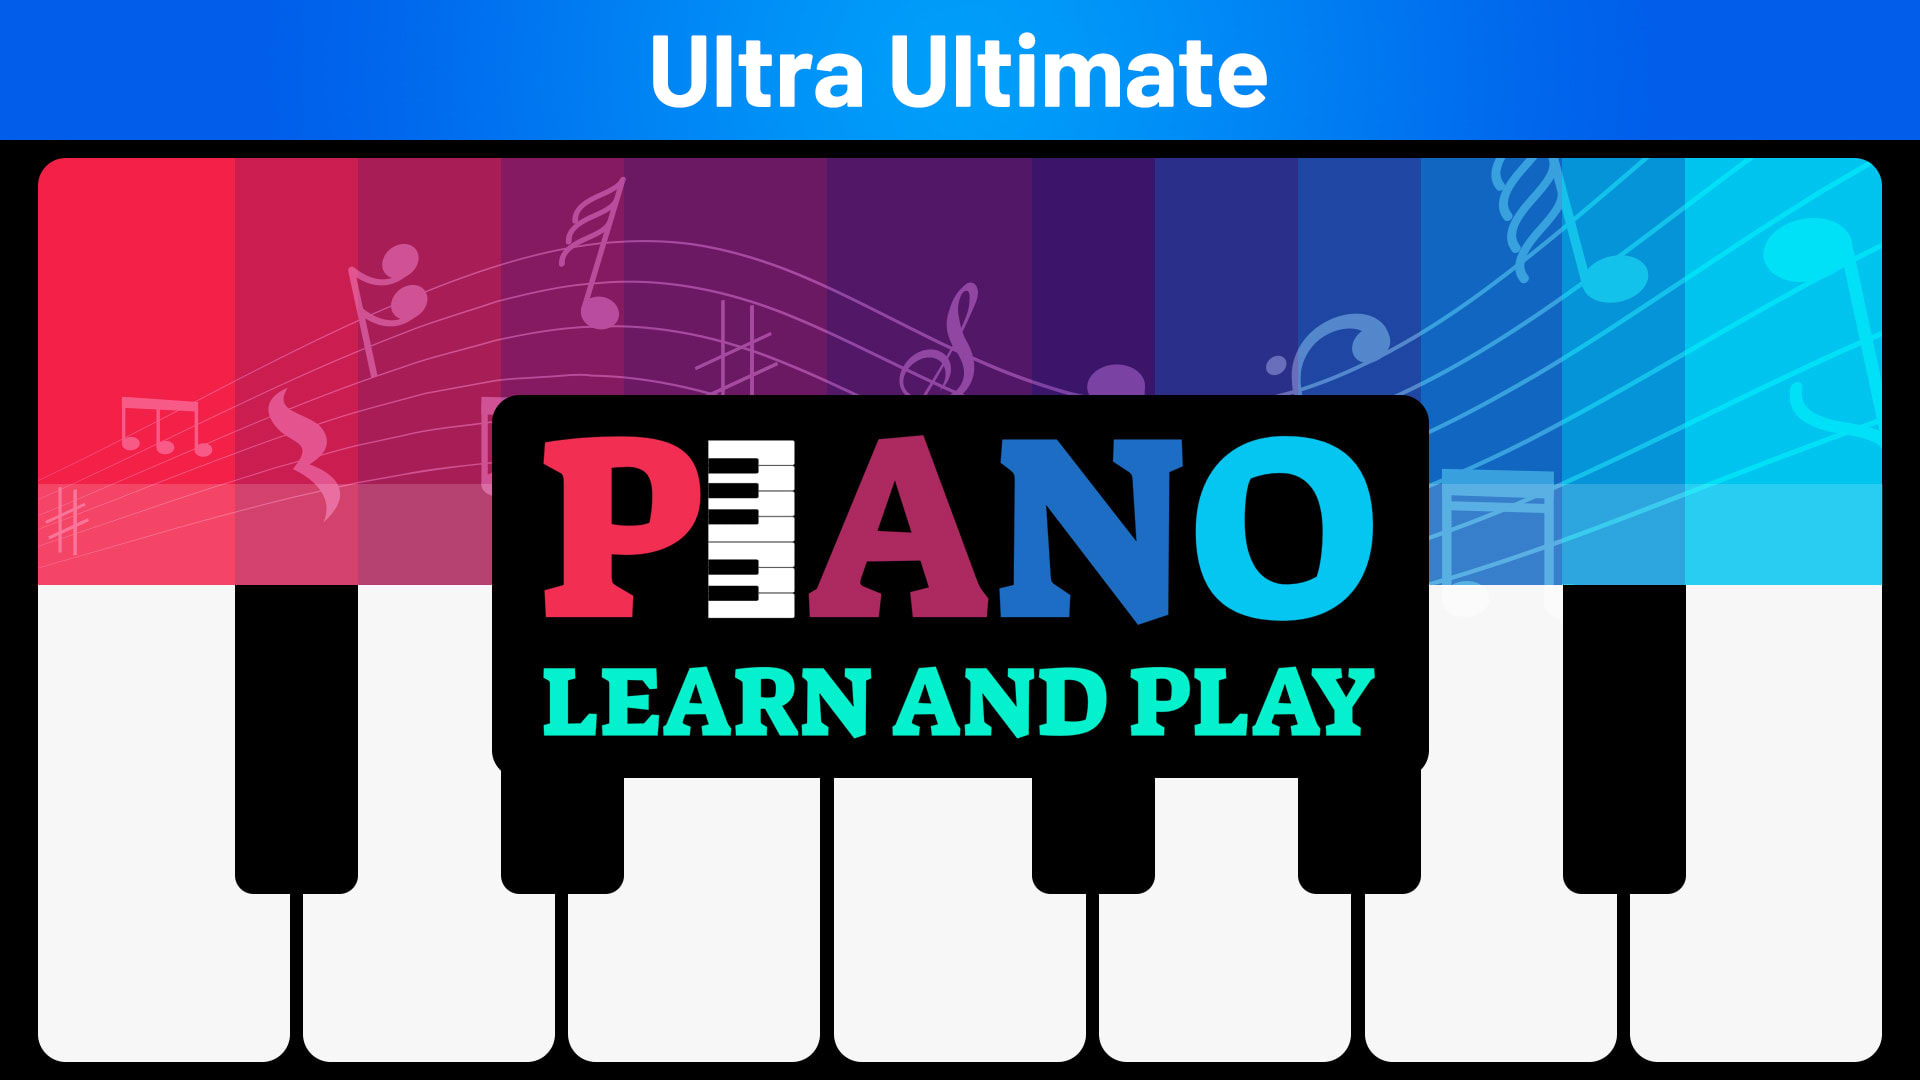 Piano: Learn and Play Ultra Ultimate